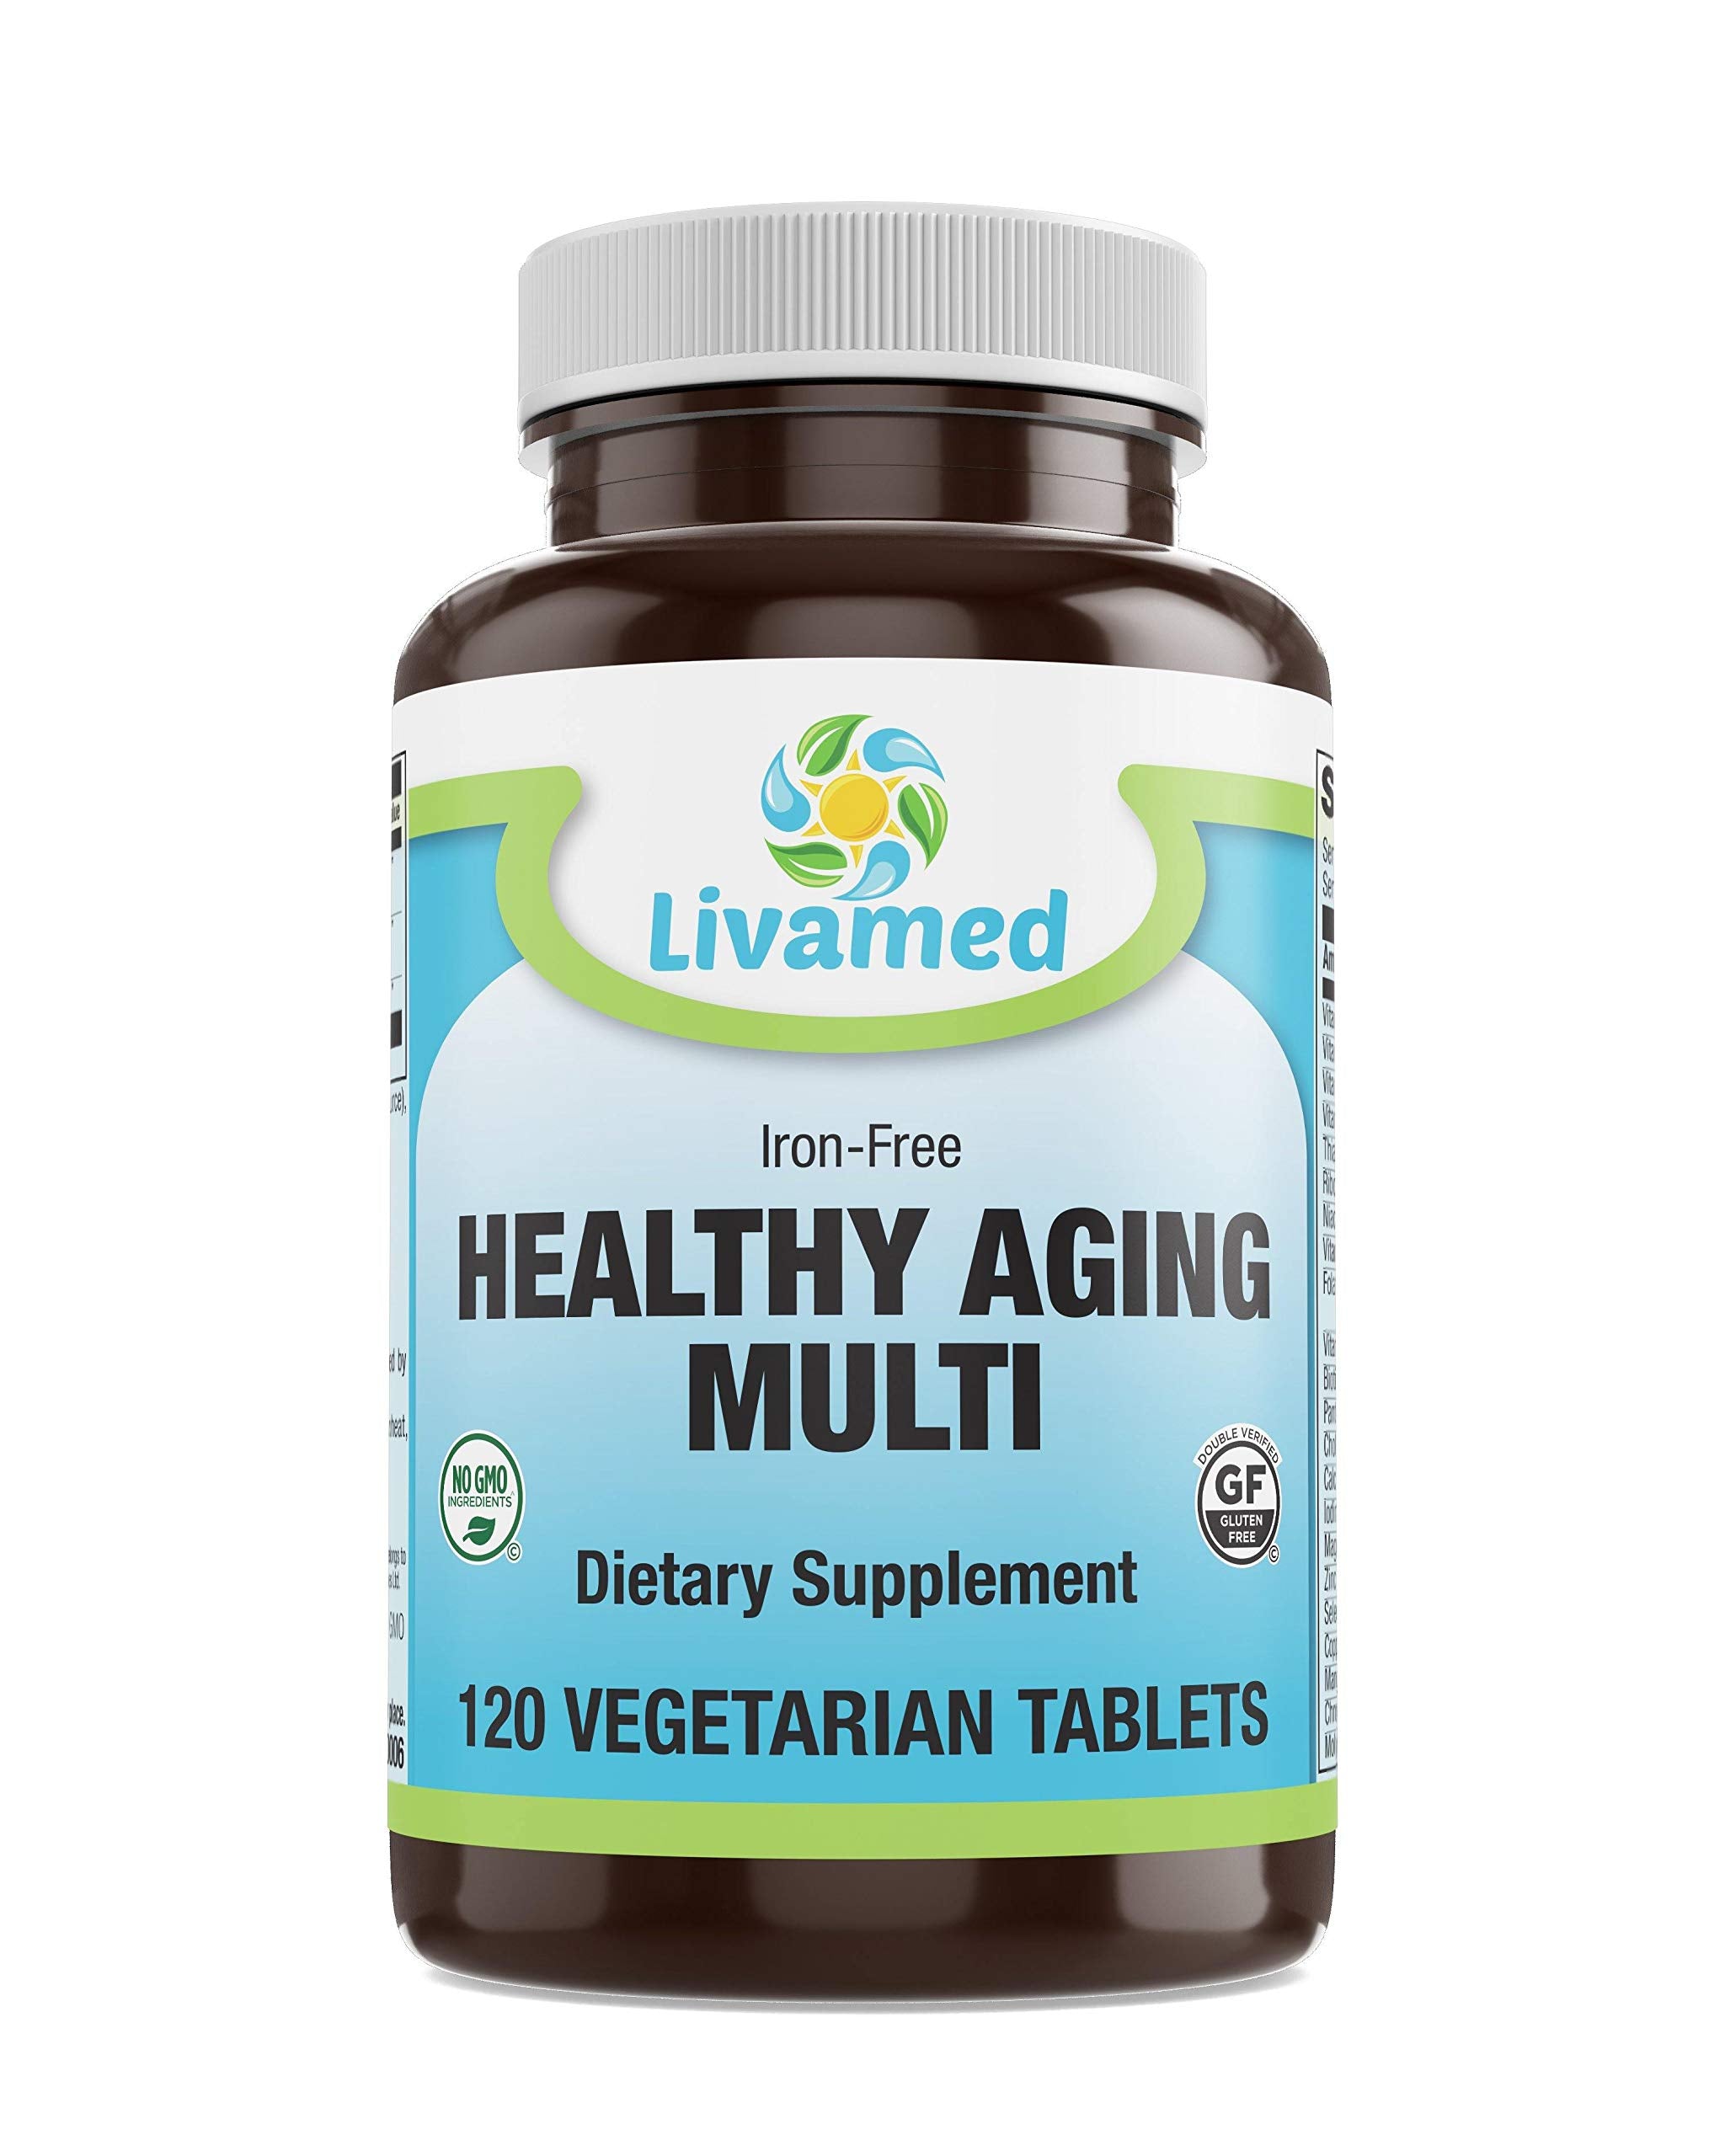 Livamed - Healthy Aging Multi Iron Free Veg Tabs 120 Count